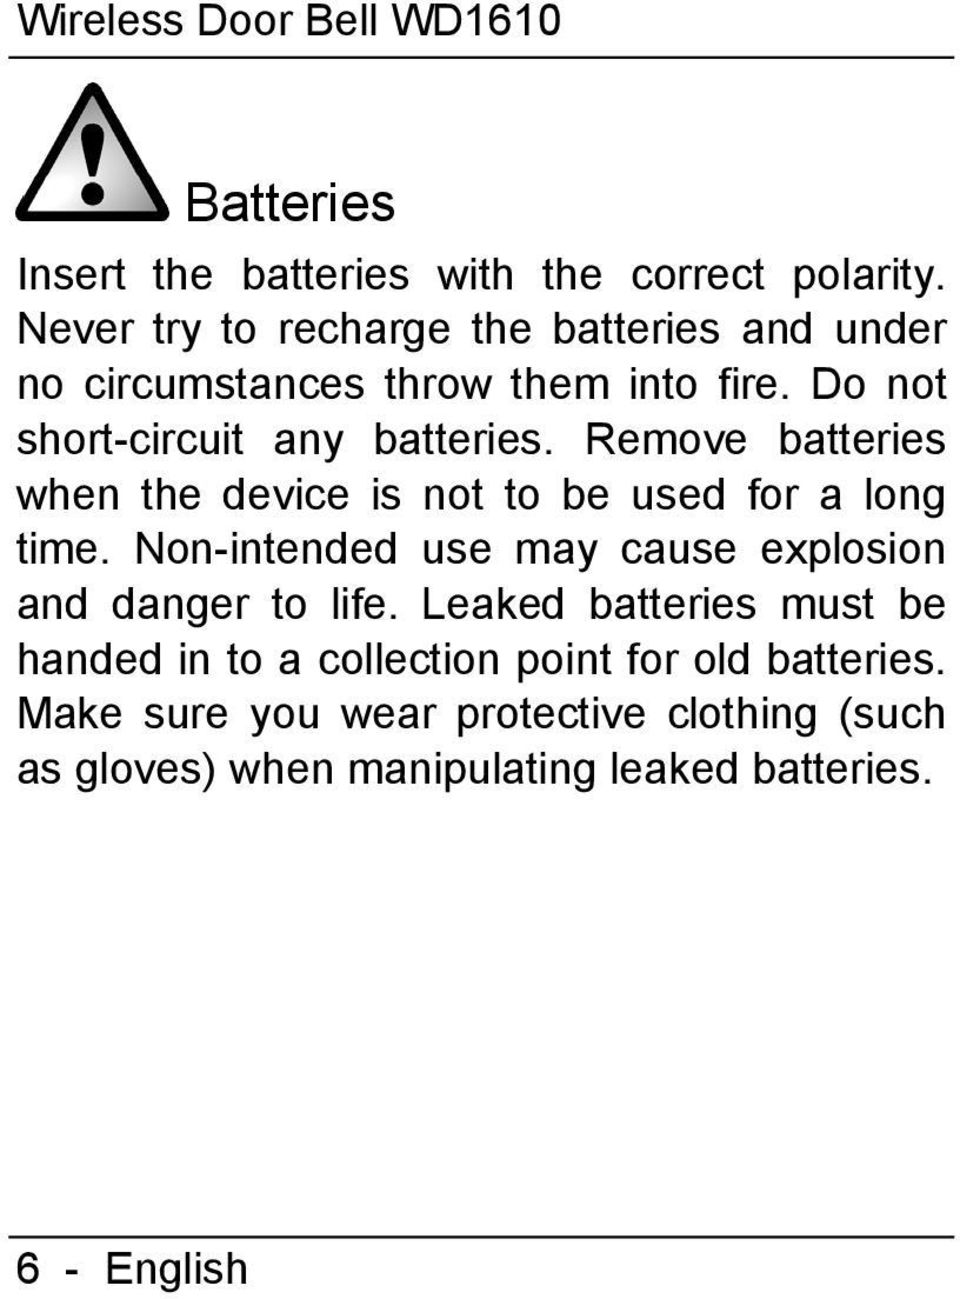 Remove batteries when the device is not to be used for a long time. Non-intended use may cause explosion and danger to life.